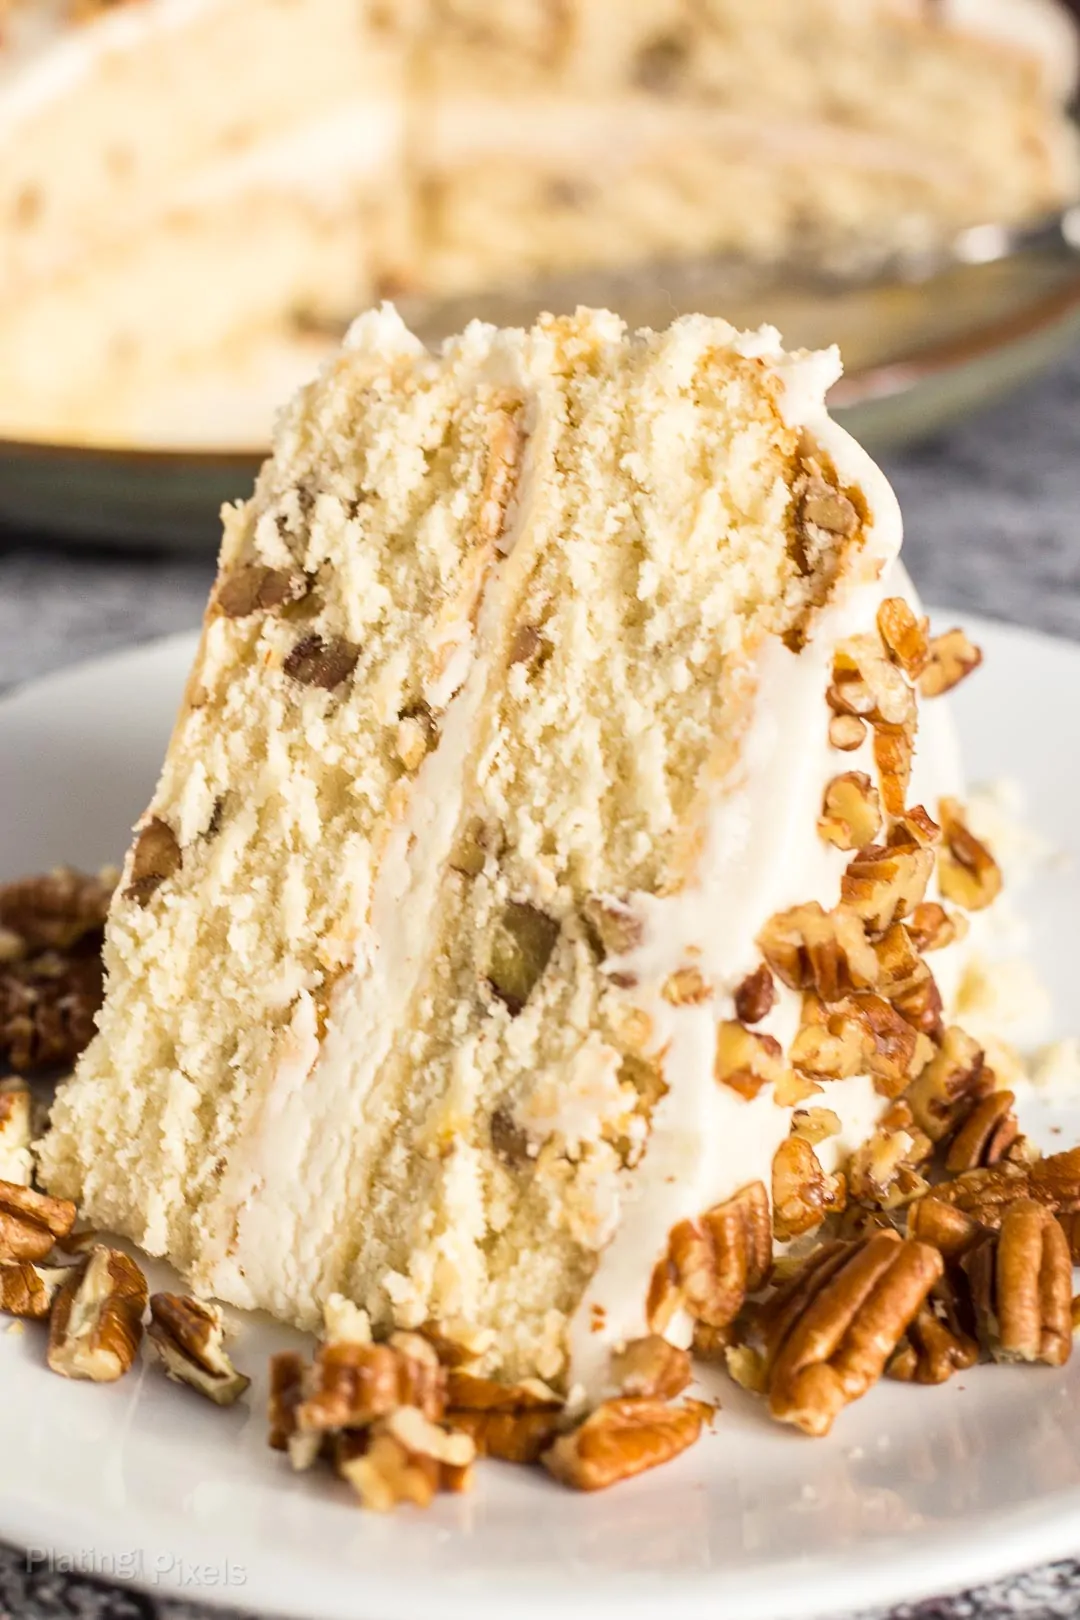 A close up of a slice of Butter Pecan Cake on a plate garnished with chopped pecans